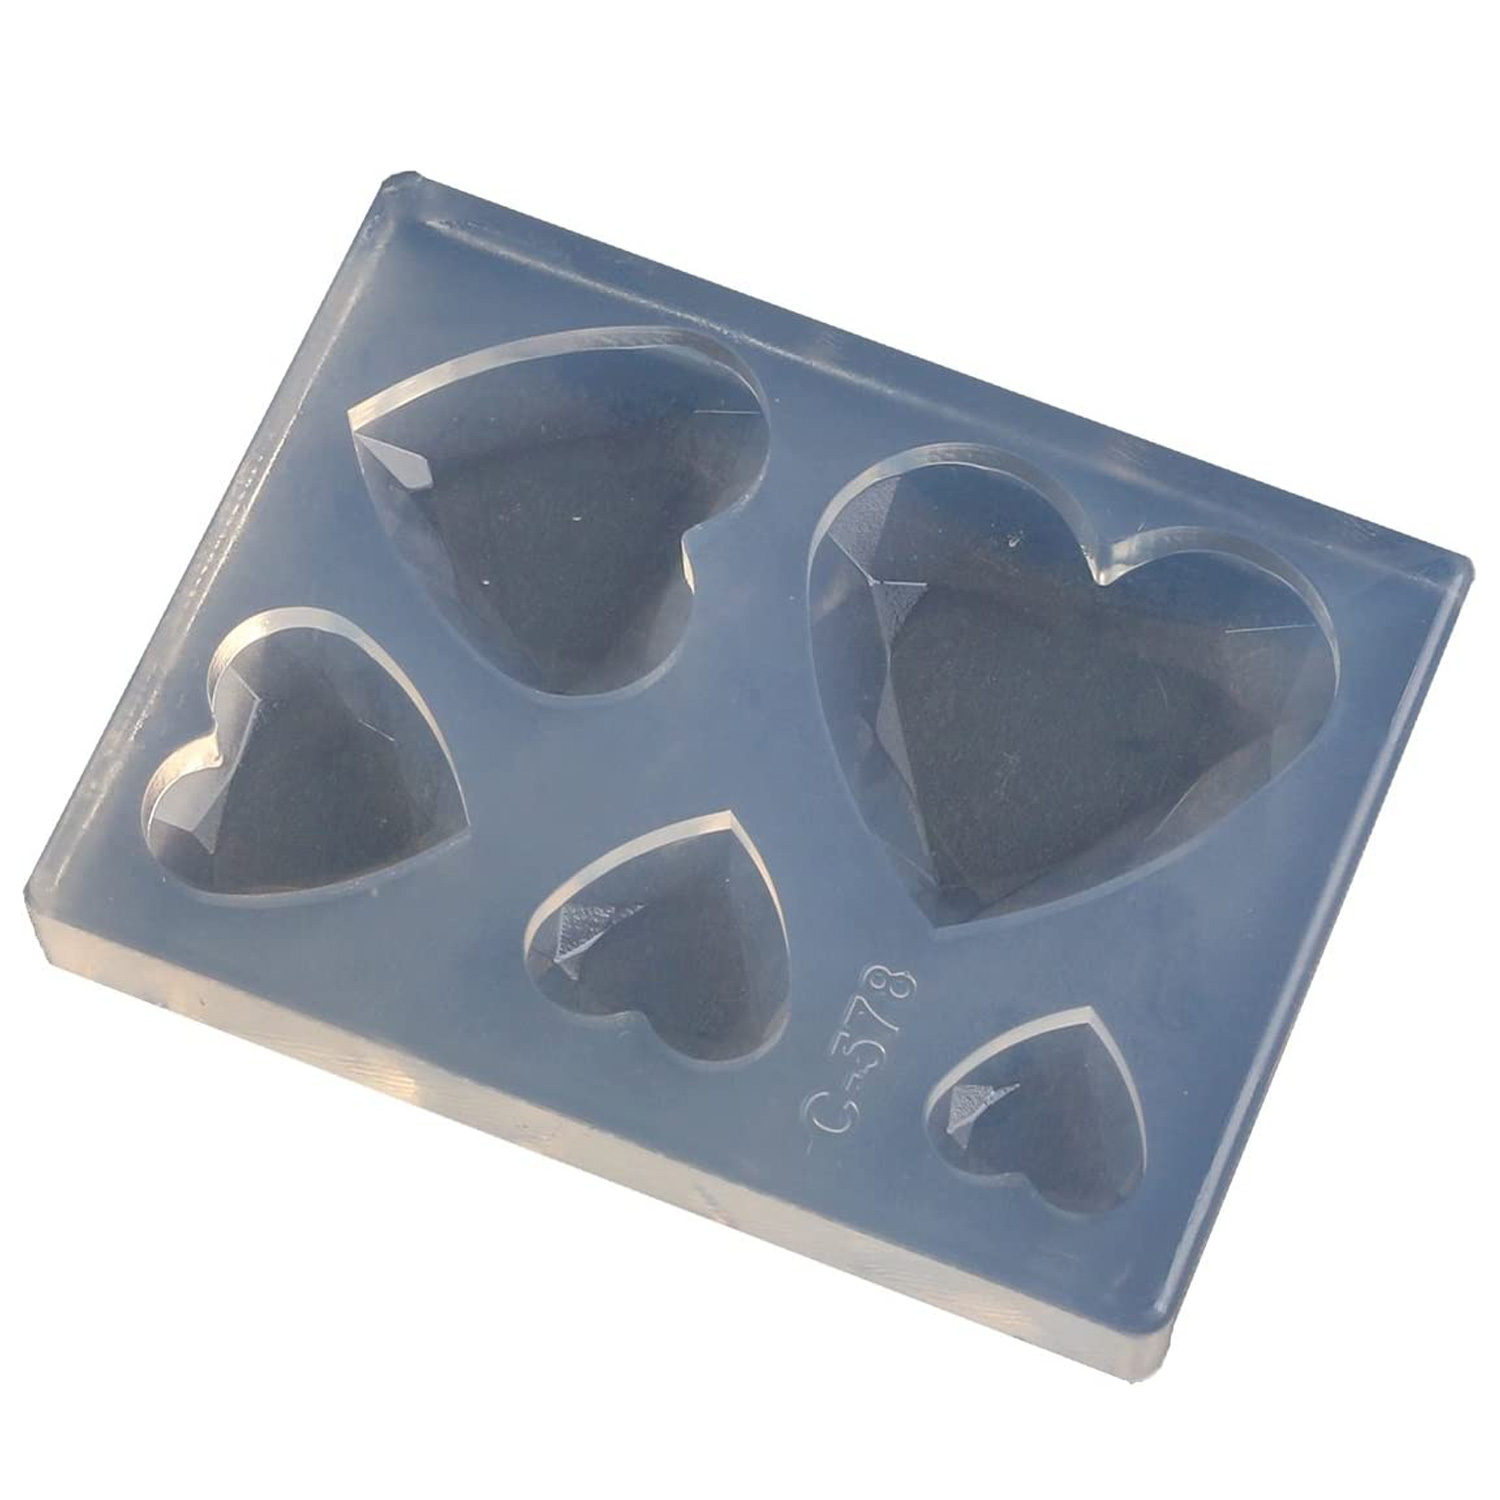 KAM-REJ-578  Resin Crafting Silicone Mold  (pcs)